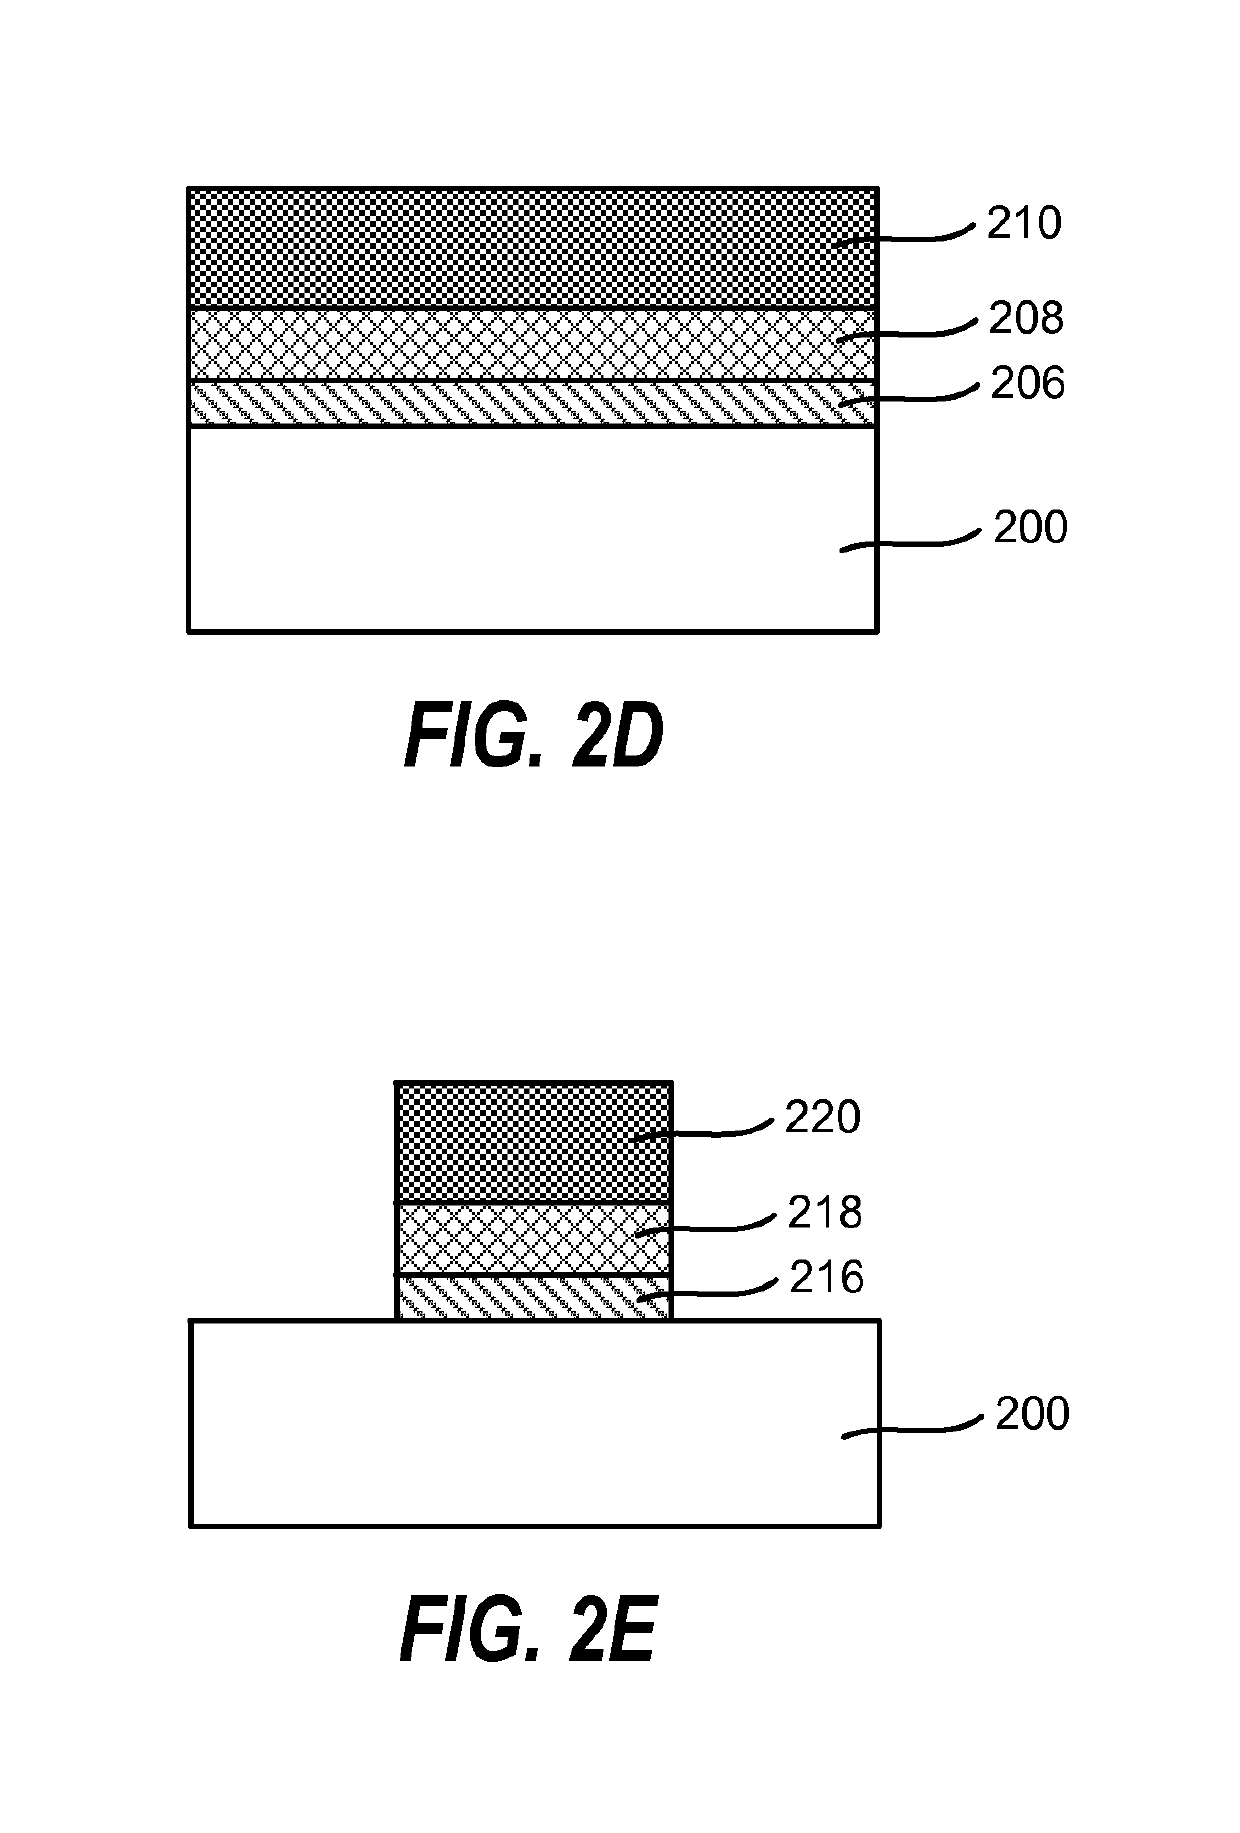 Method of enhancing high-k film nucleation rate and electrical mobility in a semiconductor device by microwave plasma treatment